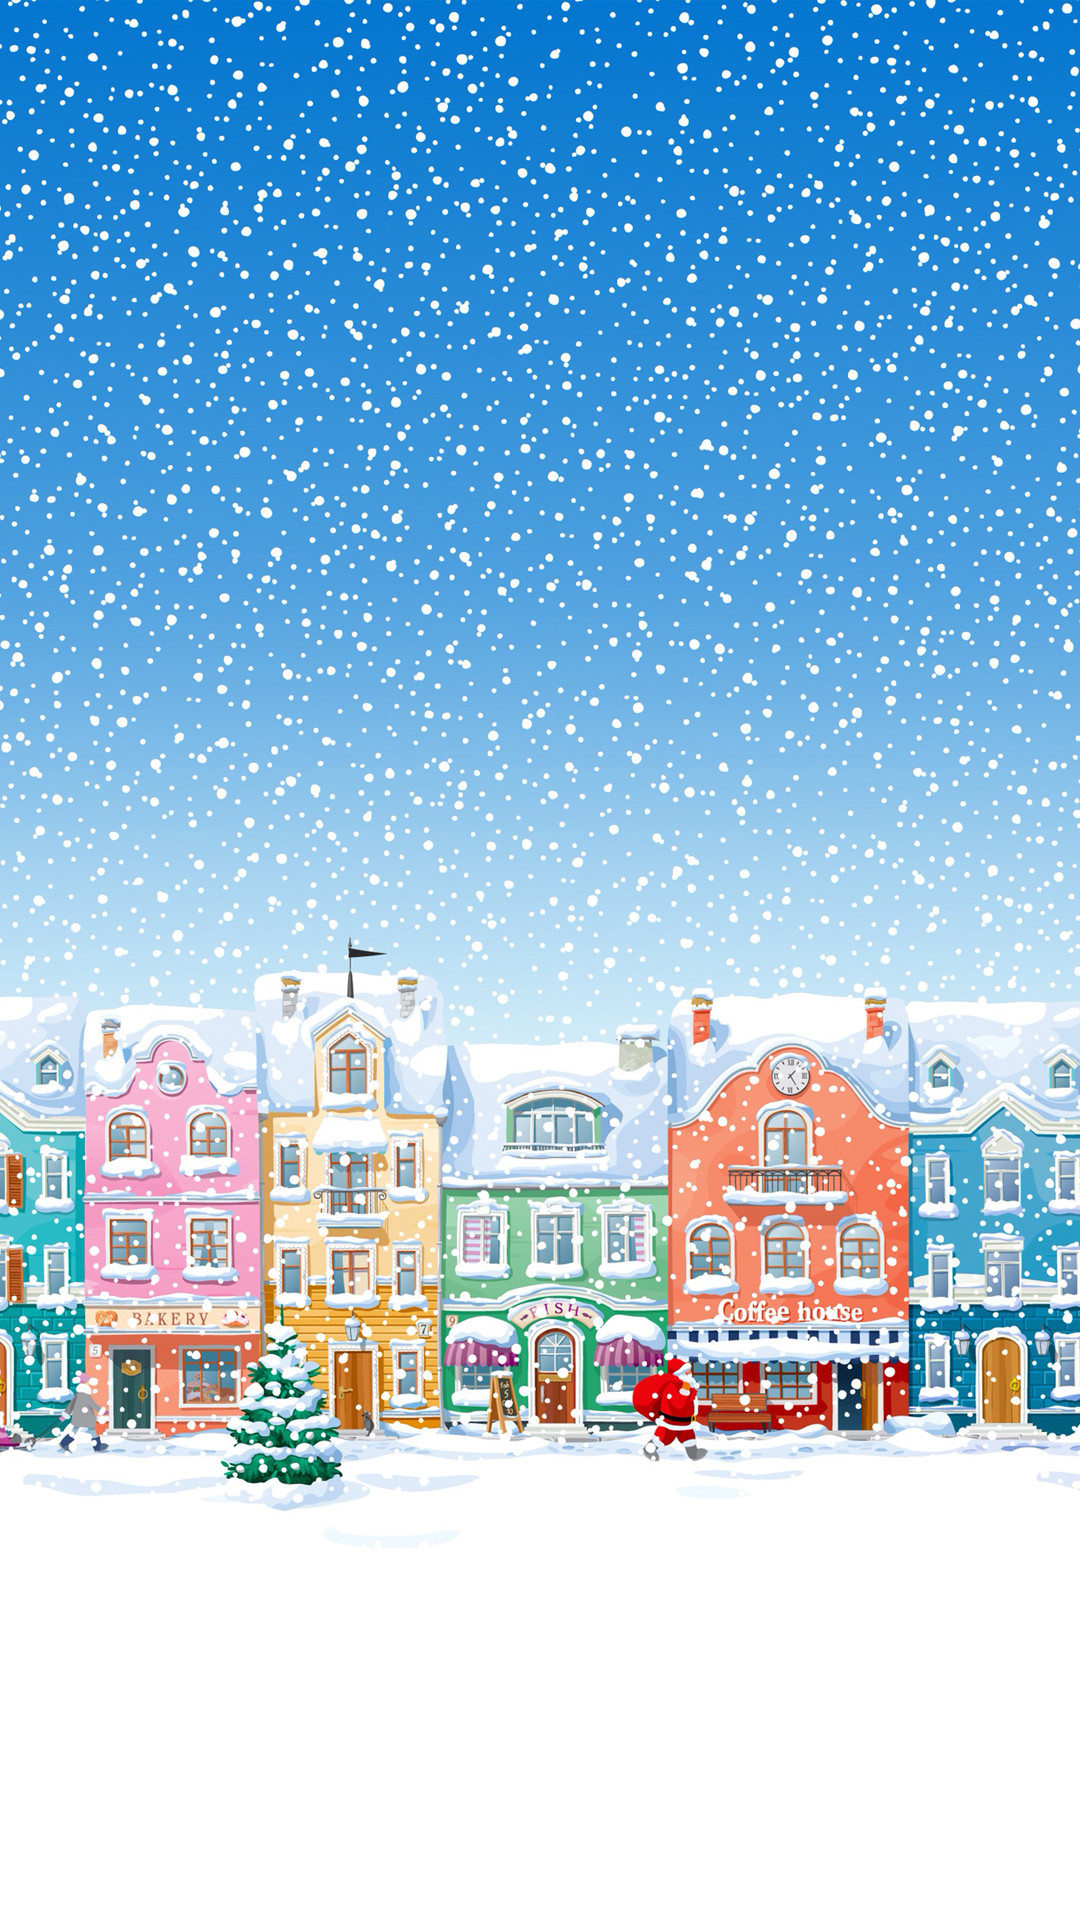 1080x1920 Snowy Town Santa Claus Delivering Christmas Presents iPhone 6 wallpaper